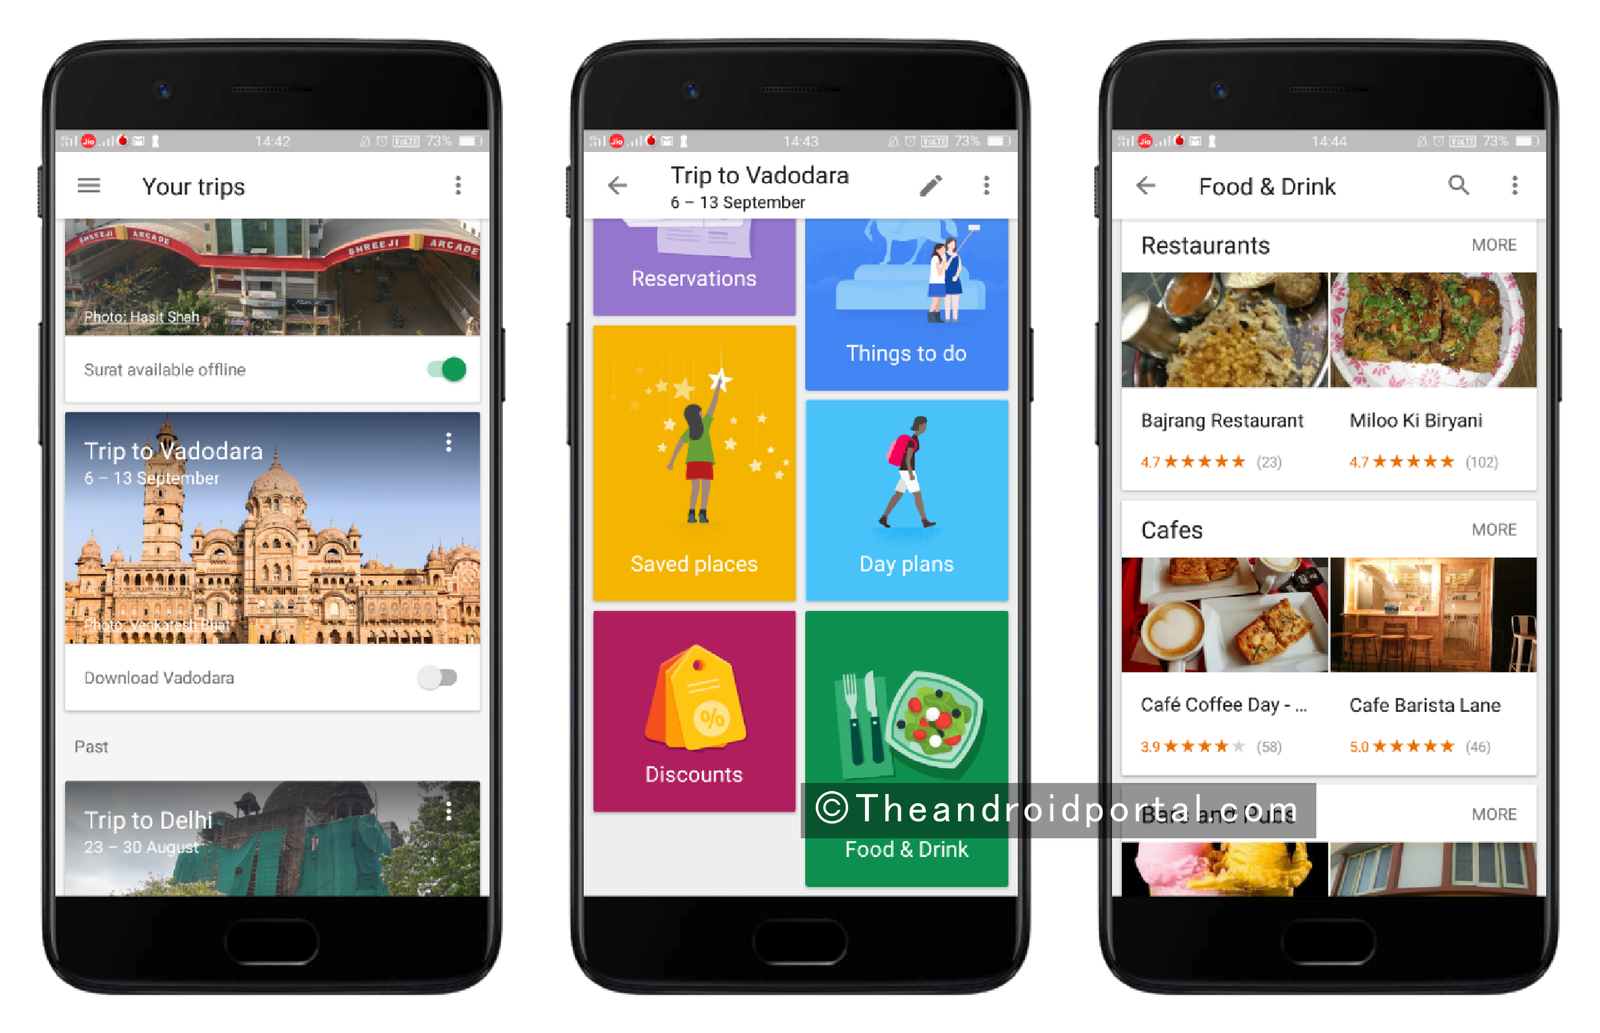 Find Best Food and Drinks near the Destination - theandroidportal.com